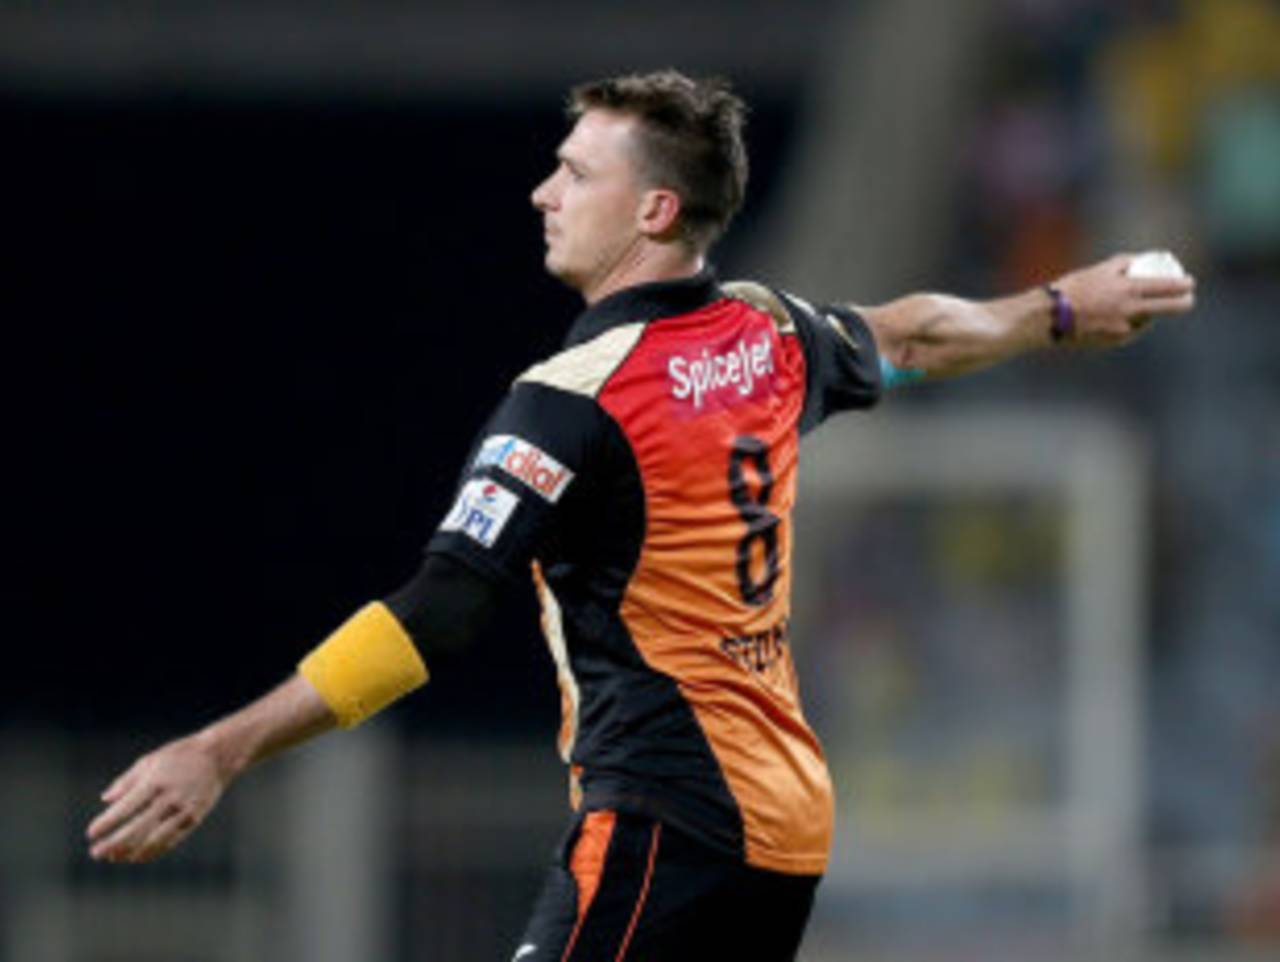 Dale Steyn leaked 24 runs in the final over, Chennai Super Kings v Sunrisers Hyderabad, IPL 2014, Ranchi, May 22, 2014